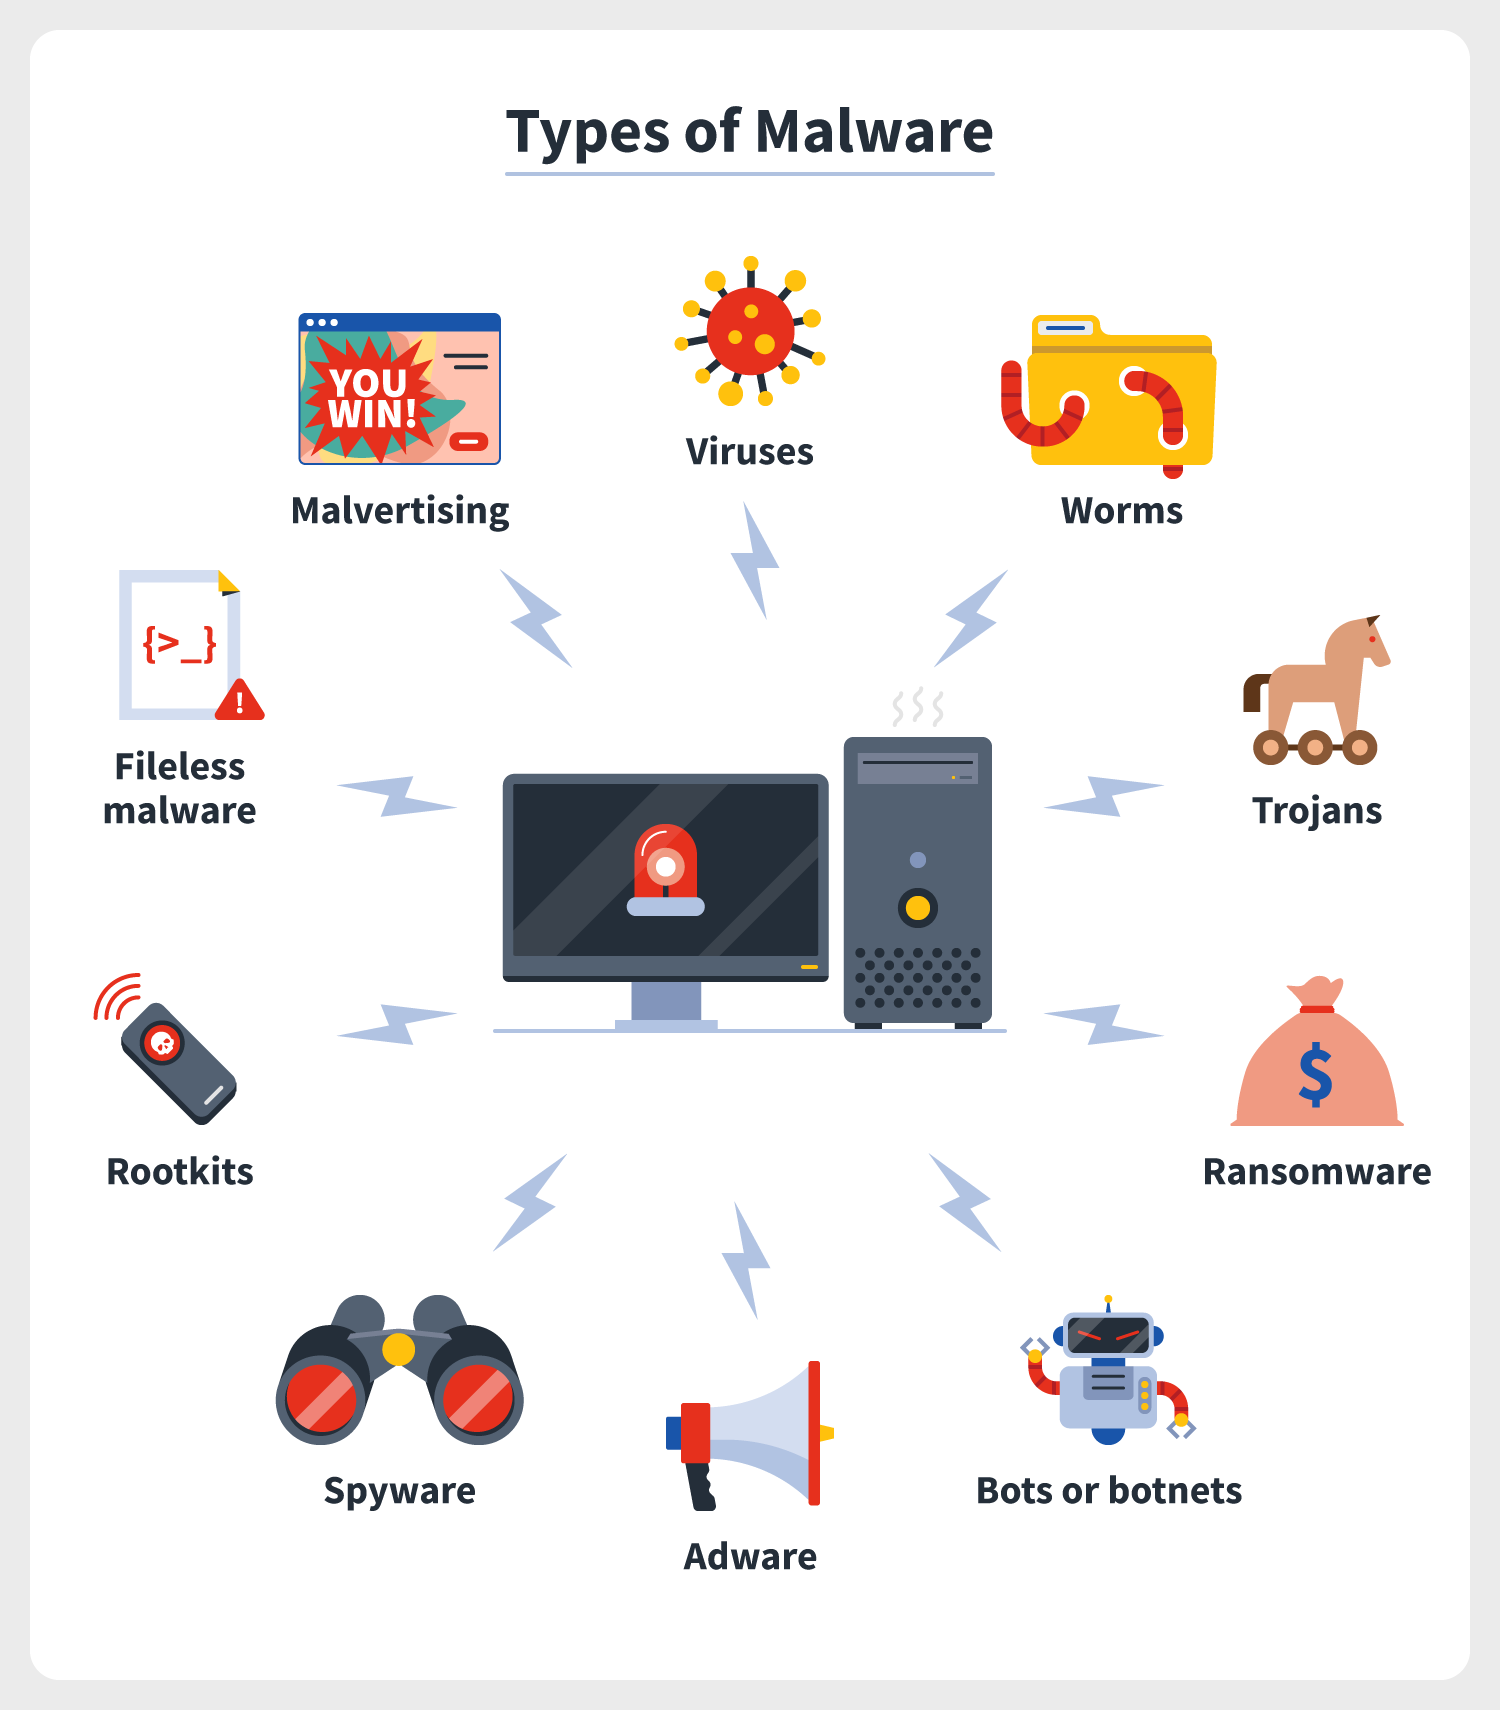 Comprehensive protection against various types of malware.
Automatic updates to ensure the latest threat detection.